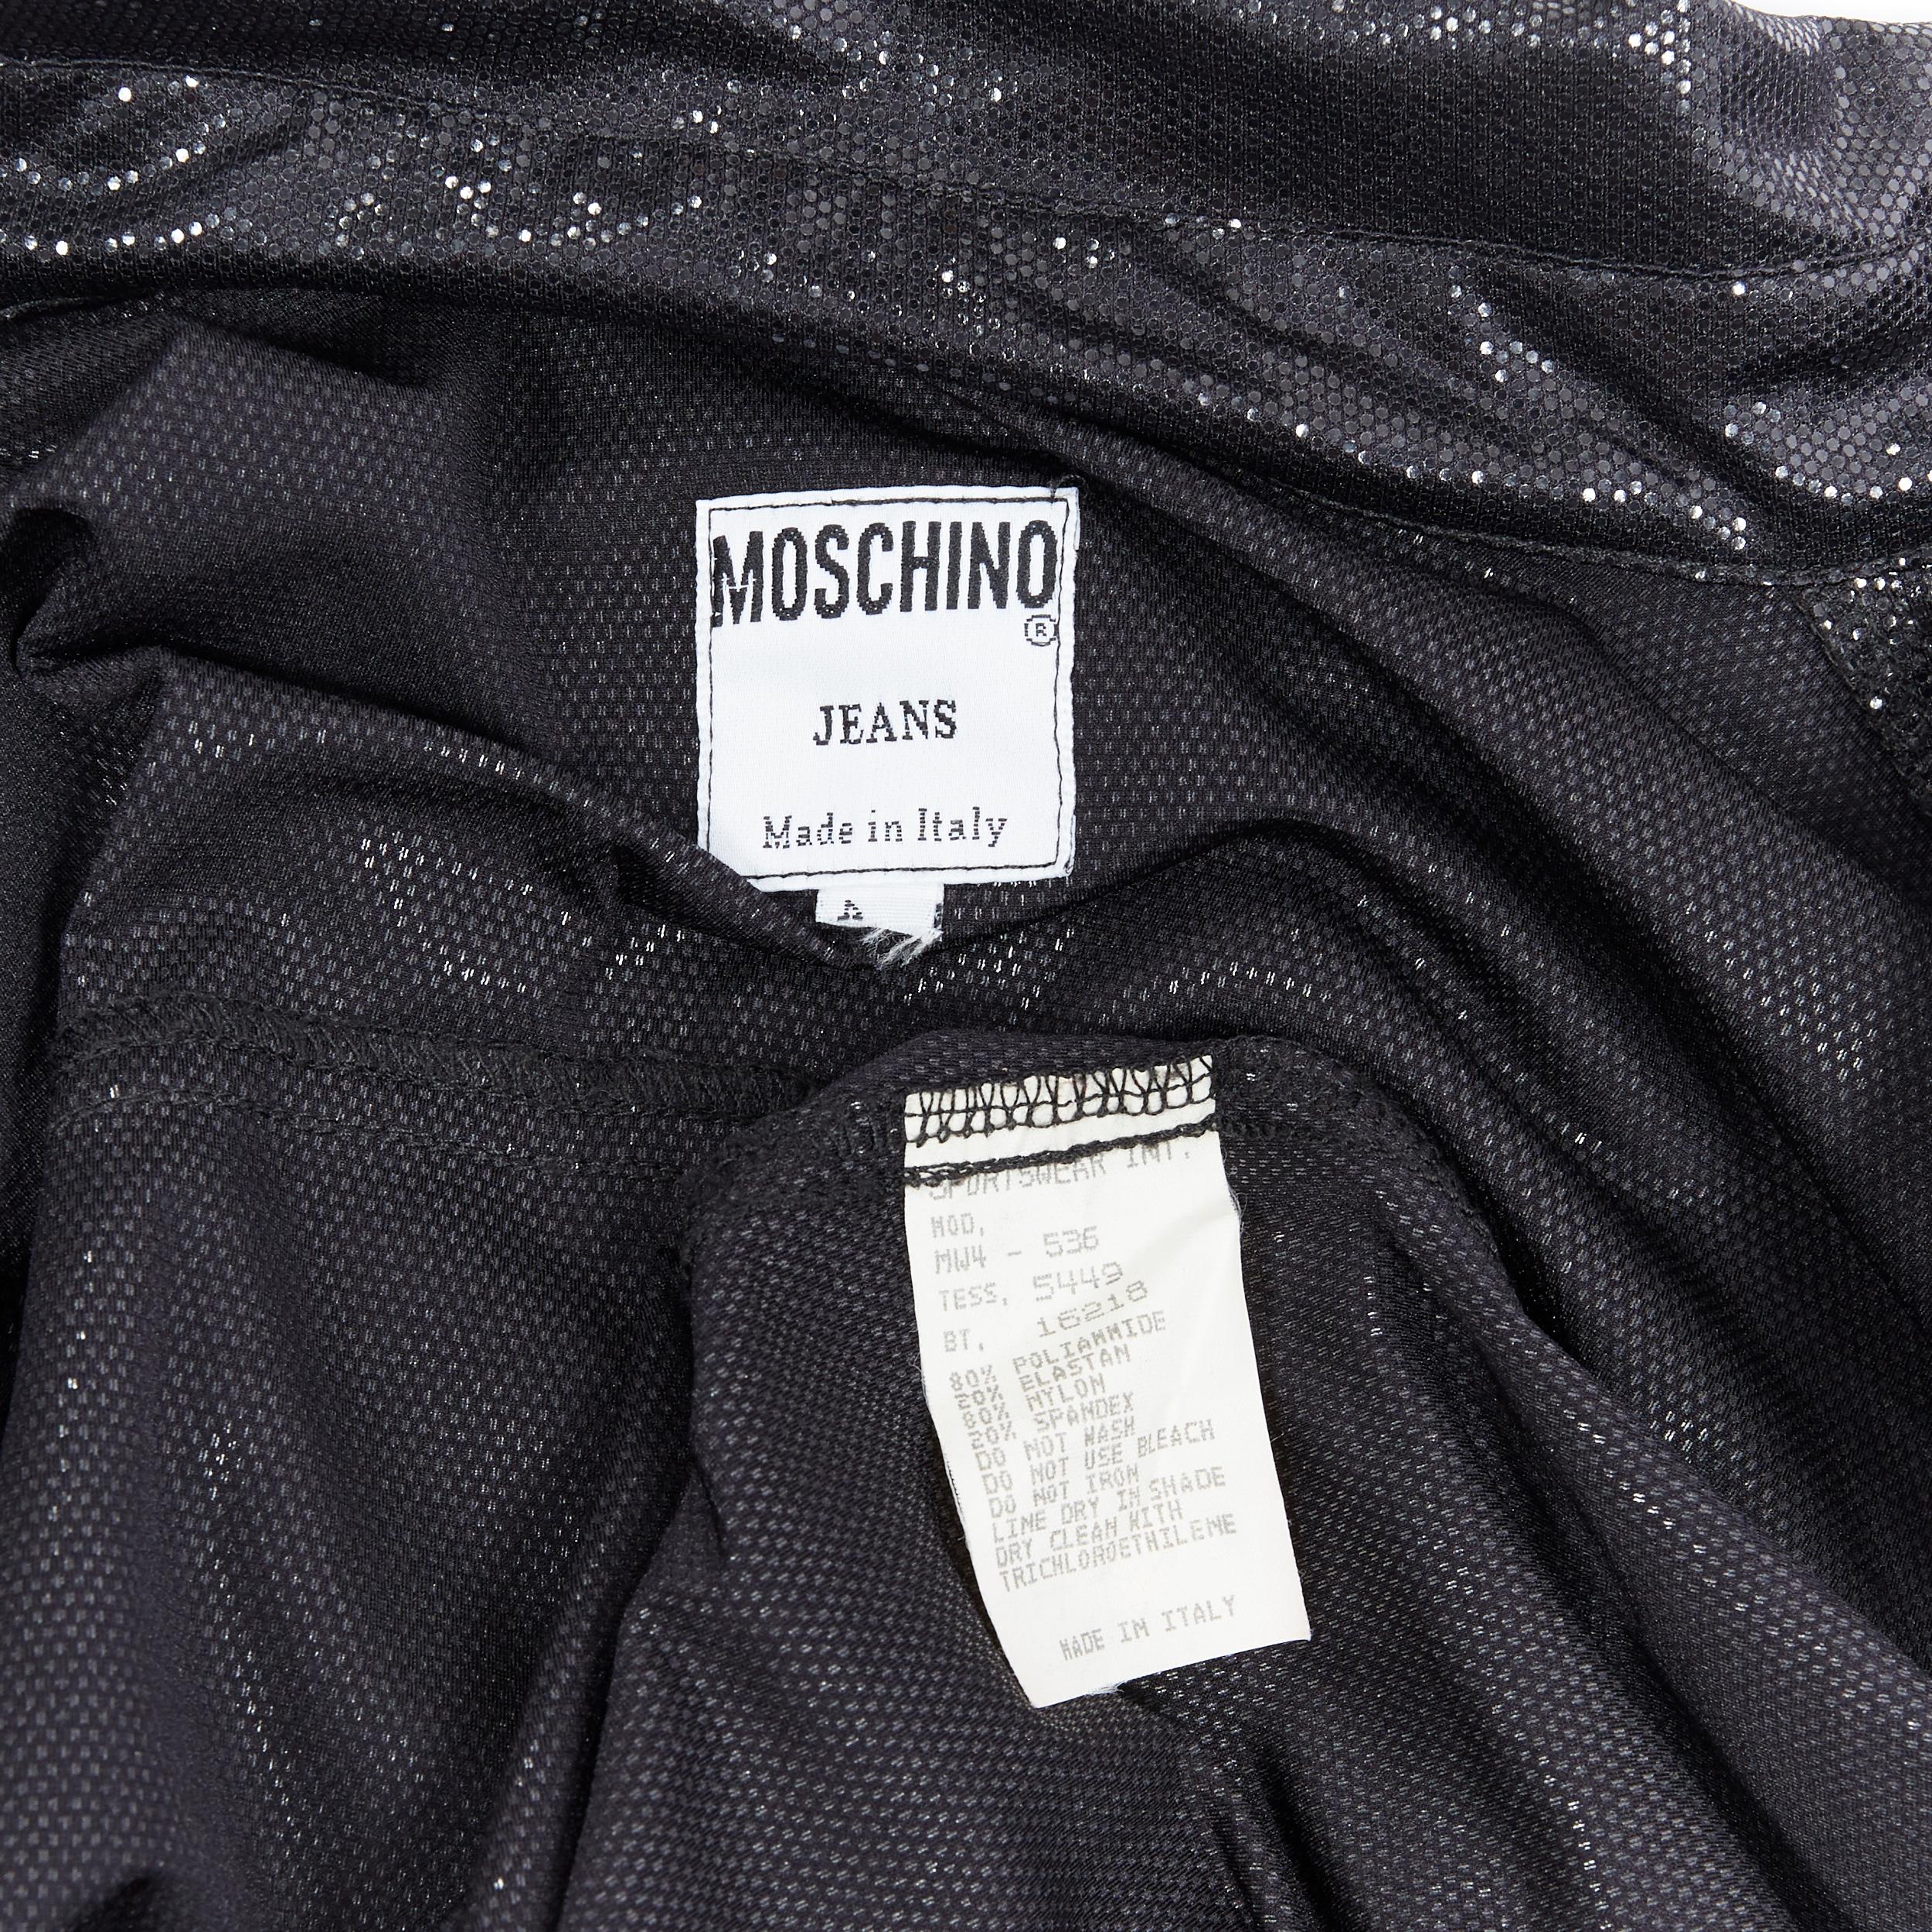 MOSCHINO JEANS vintage black shimmery wet look slim fit worker shirt top S 4